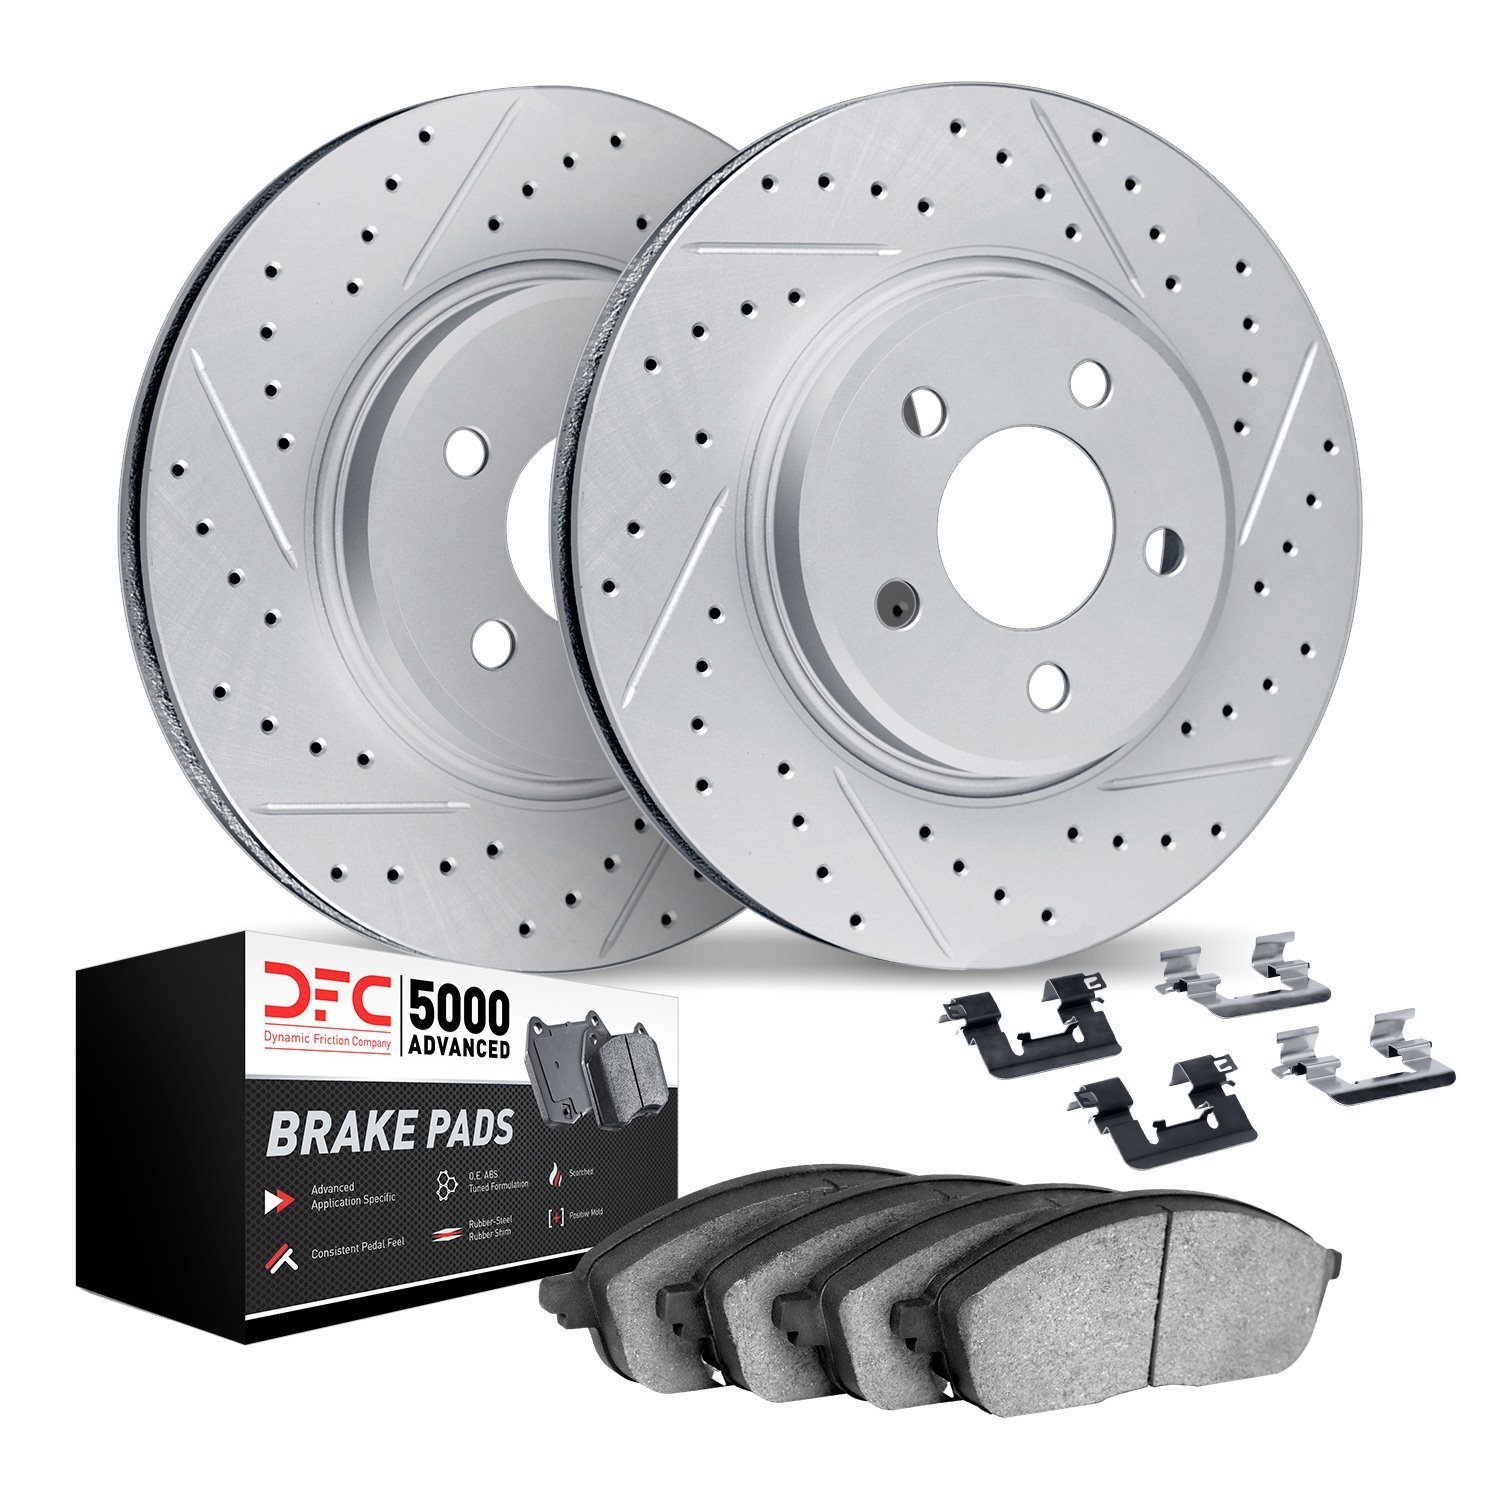 2512-54164 Geoperformance Drilled/Slotted Rotors w/5000 Advanced Brake Pads Kit & Hardware, Fits Select Ford/Lincoln/Mercury/Maz